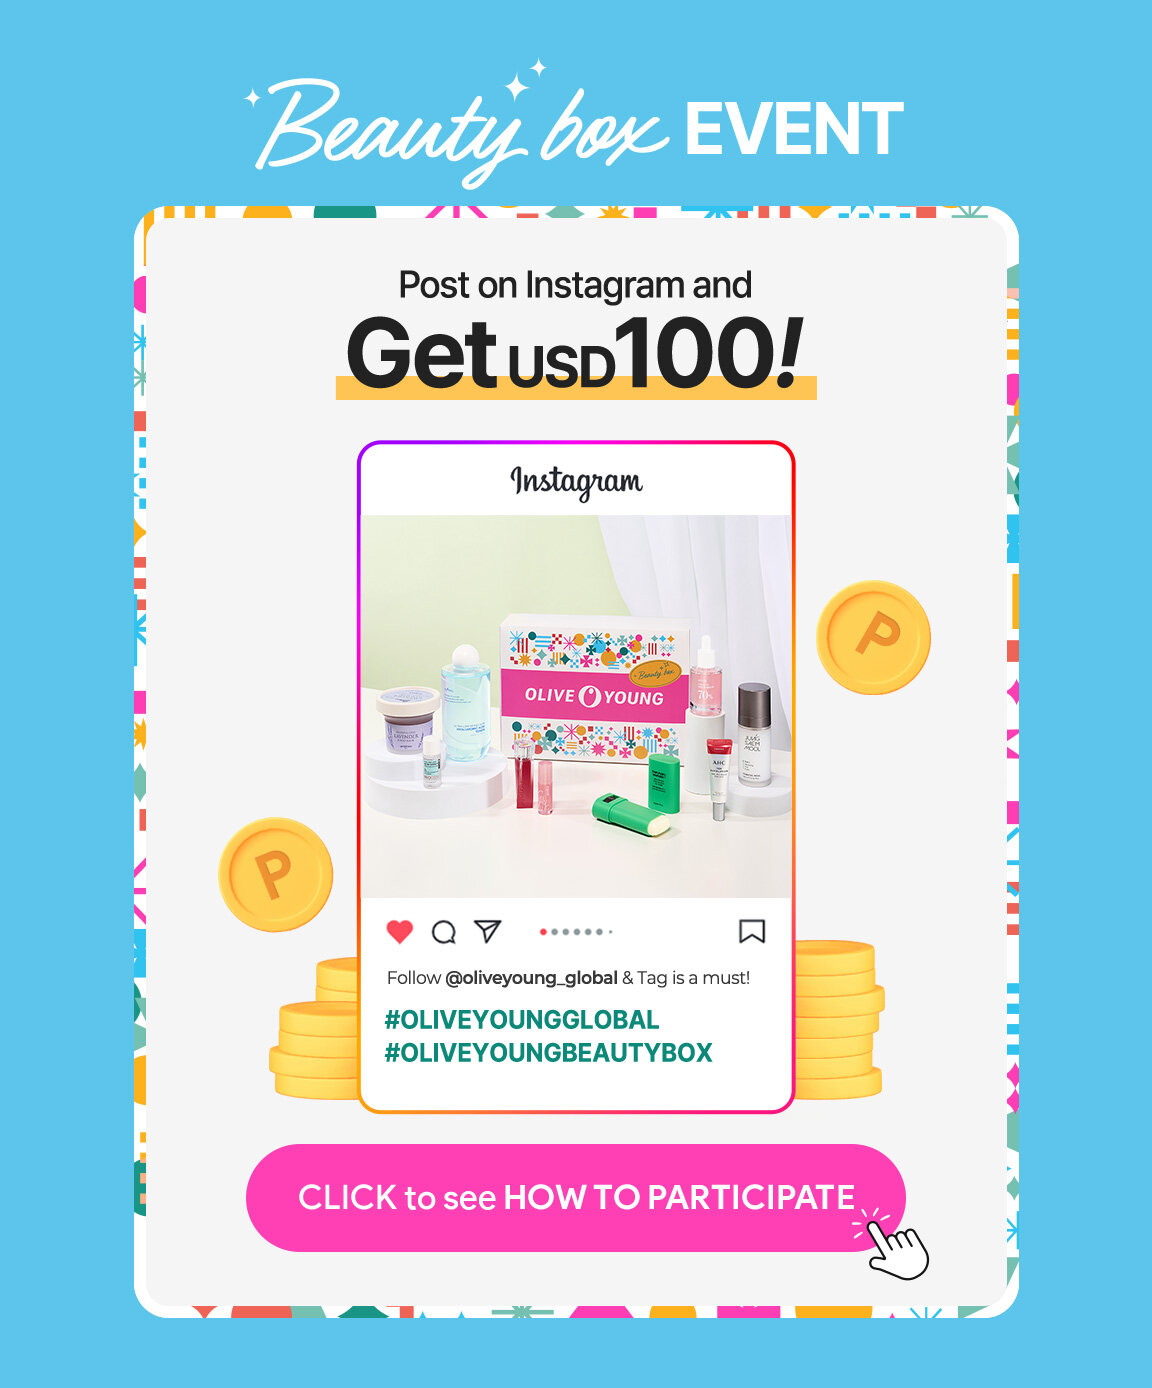 Post on Instagram and Get USD 100! #OLIVEYOUNGGLOBAL #OLIVEYOUNGBEAUTYBOX